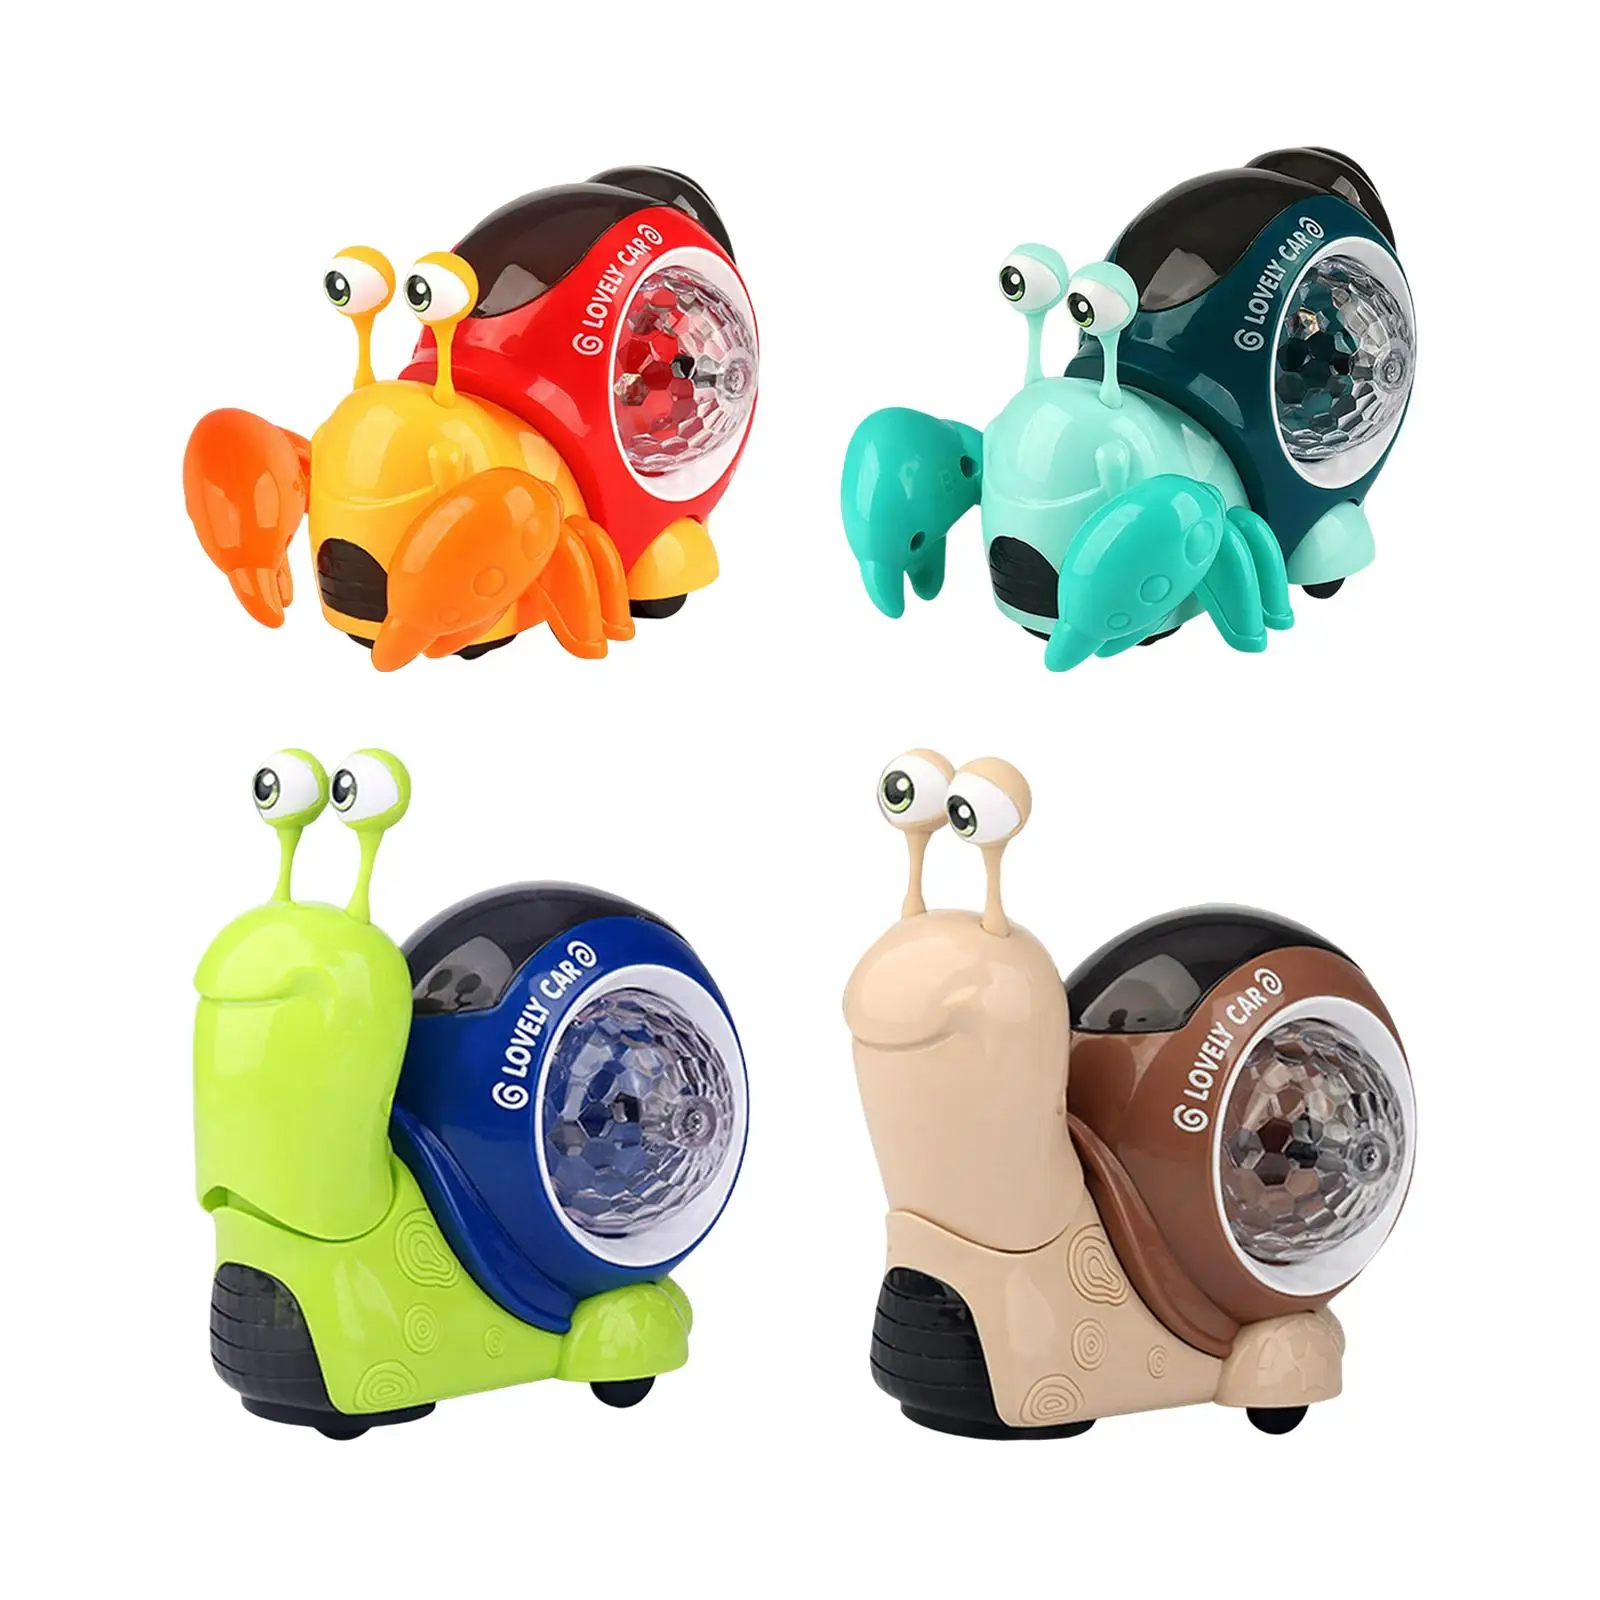 Electric car cute Toy Educational Light up Electric Baby Musical Toys Toy Children Educational Toys Boys